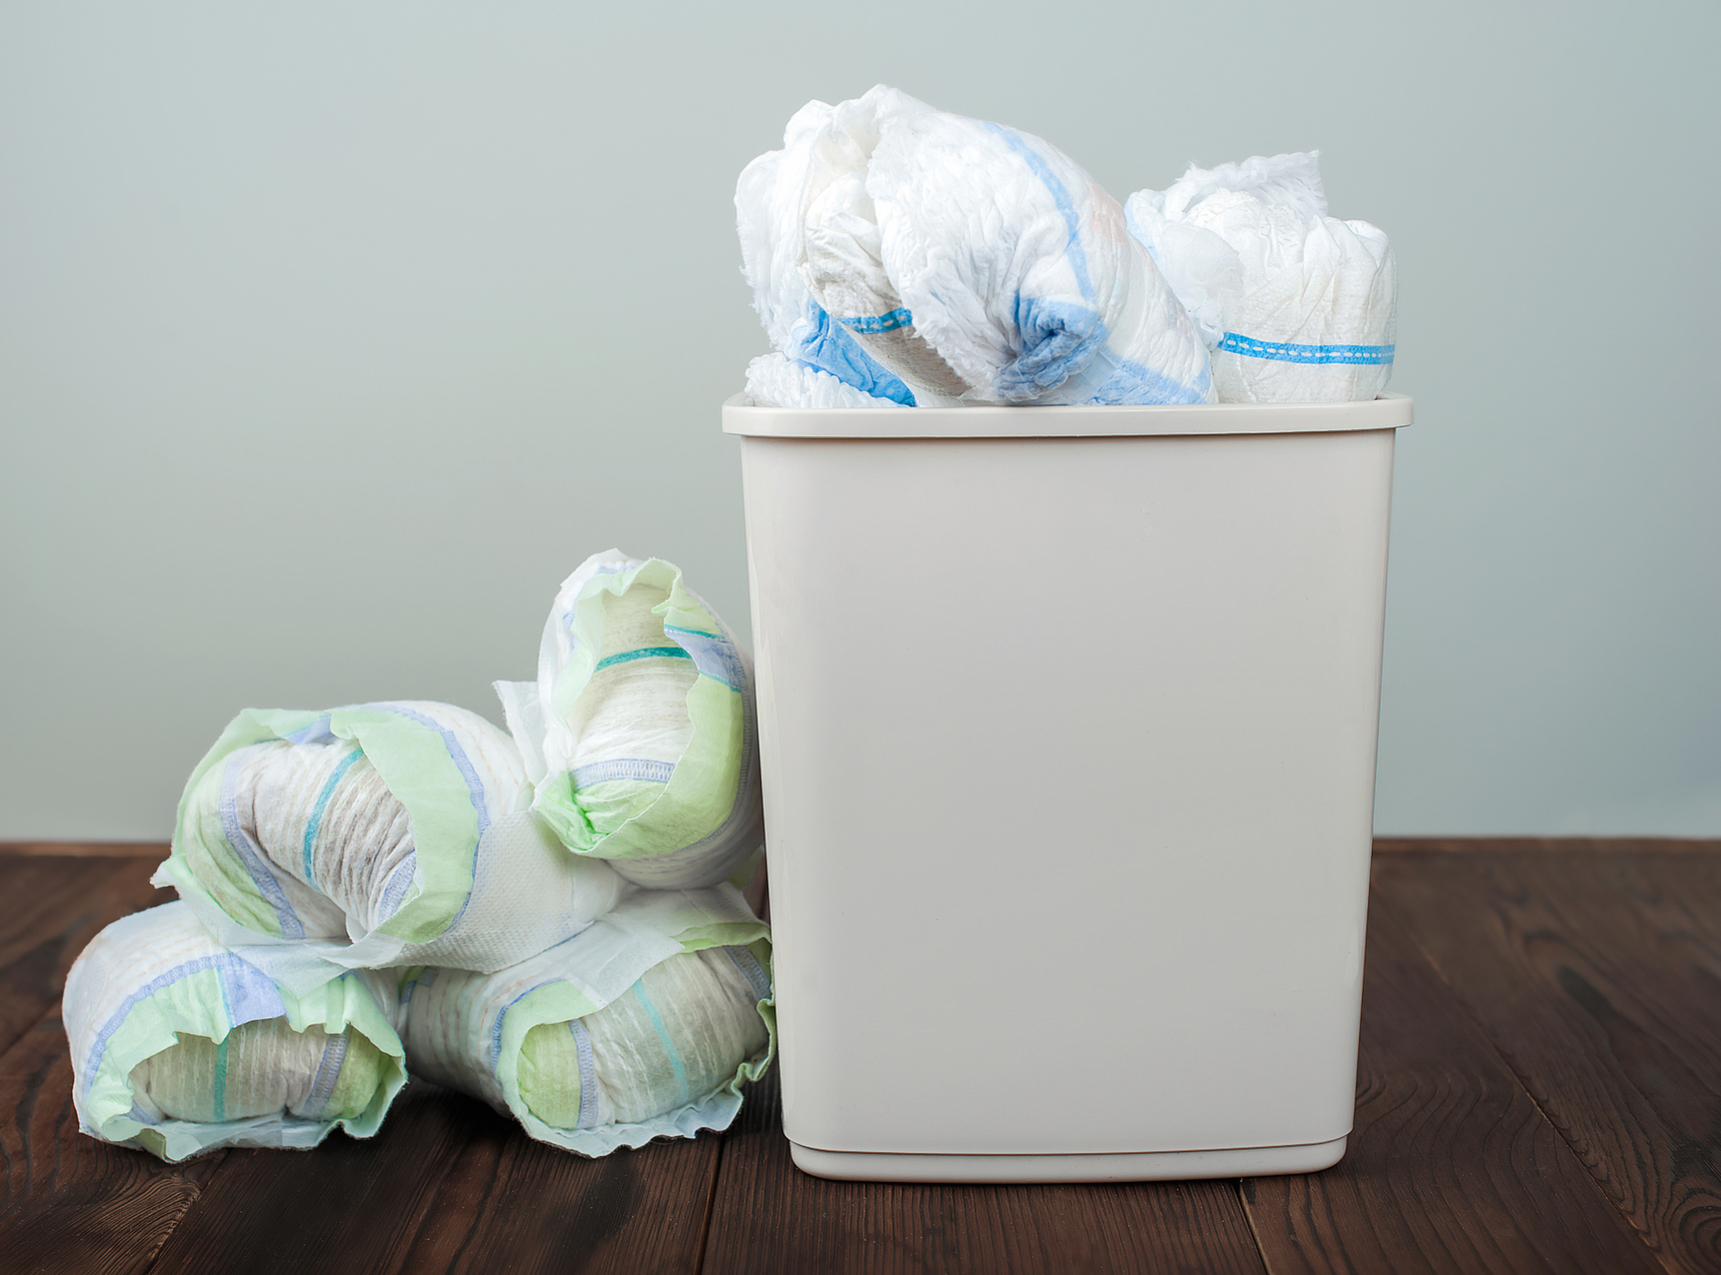 Nappies overflowing in a bin